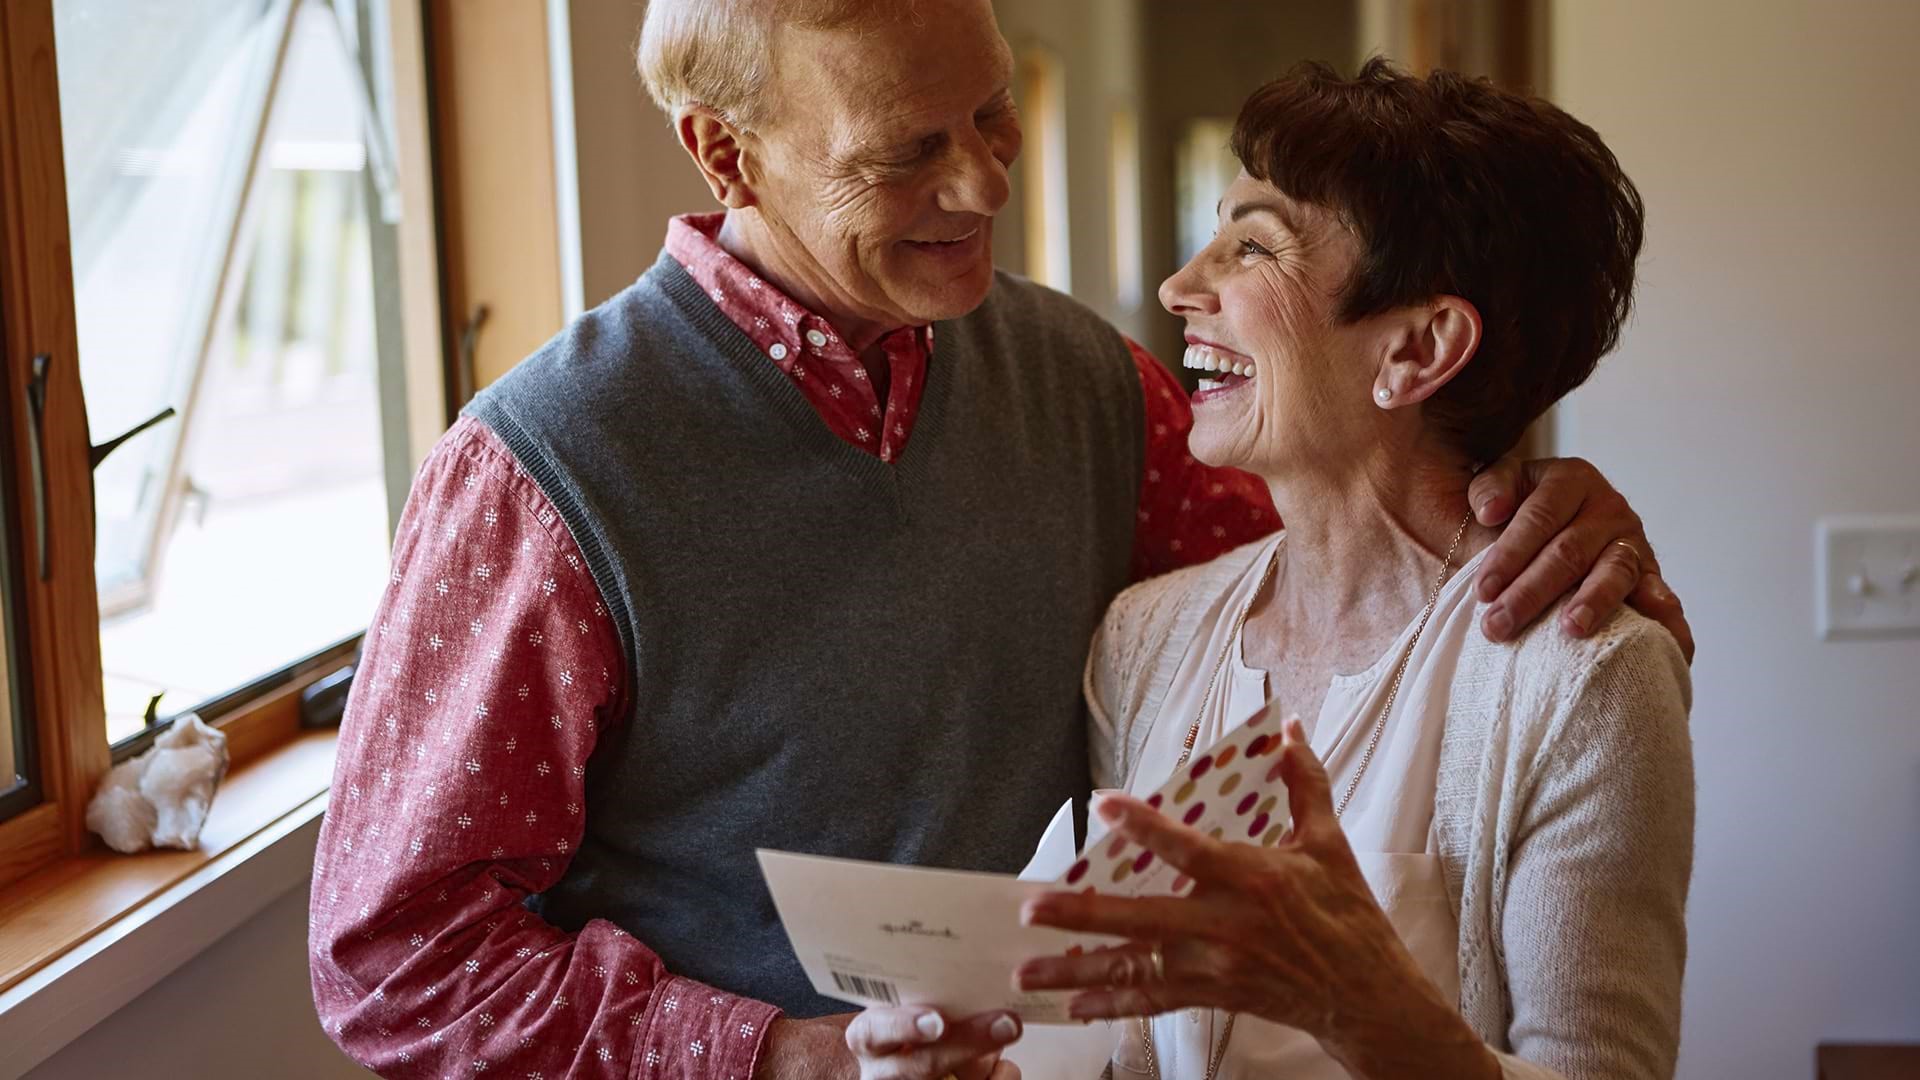 Two older people smiling over a card ARTICLE HERO IMAGE